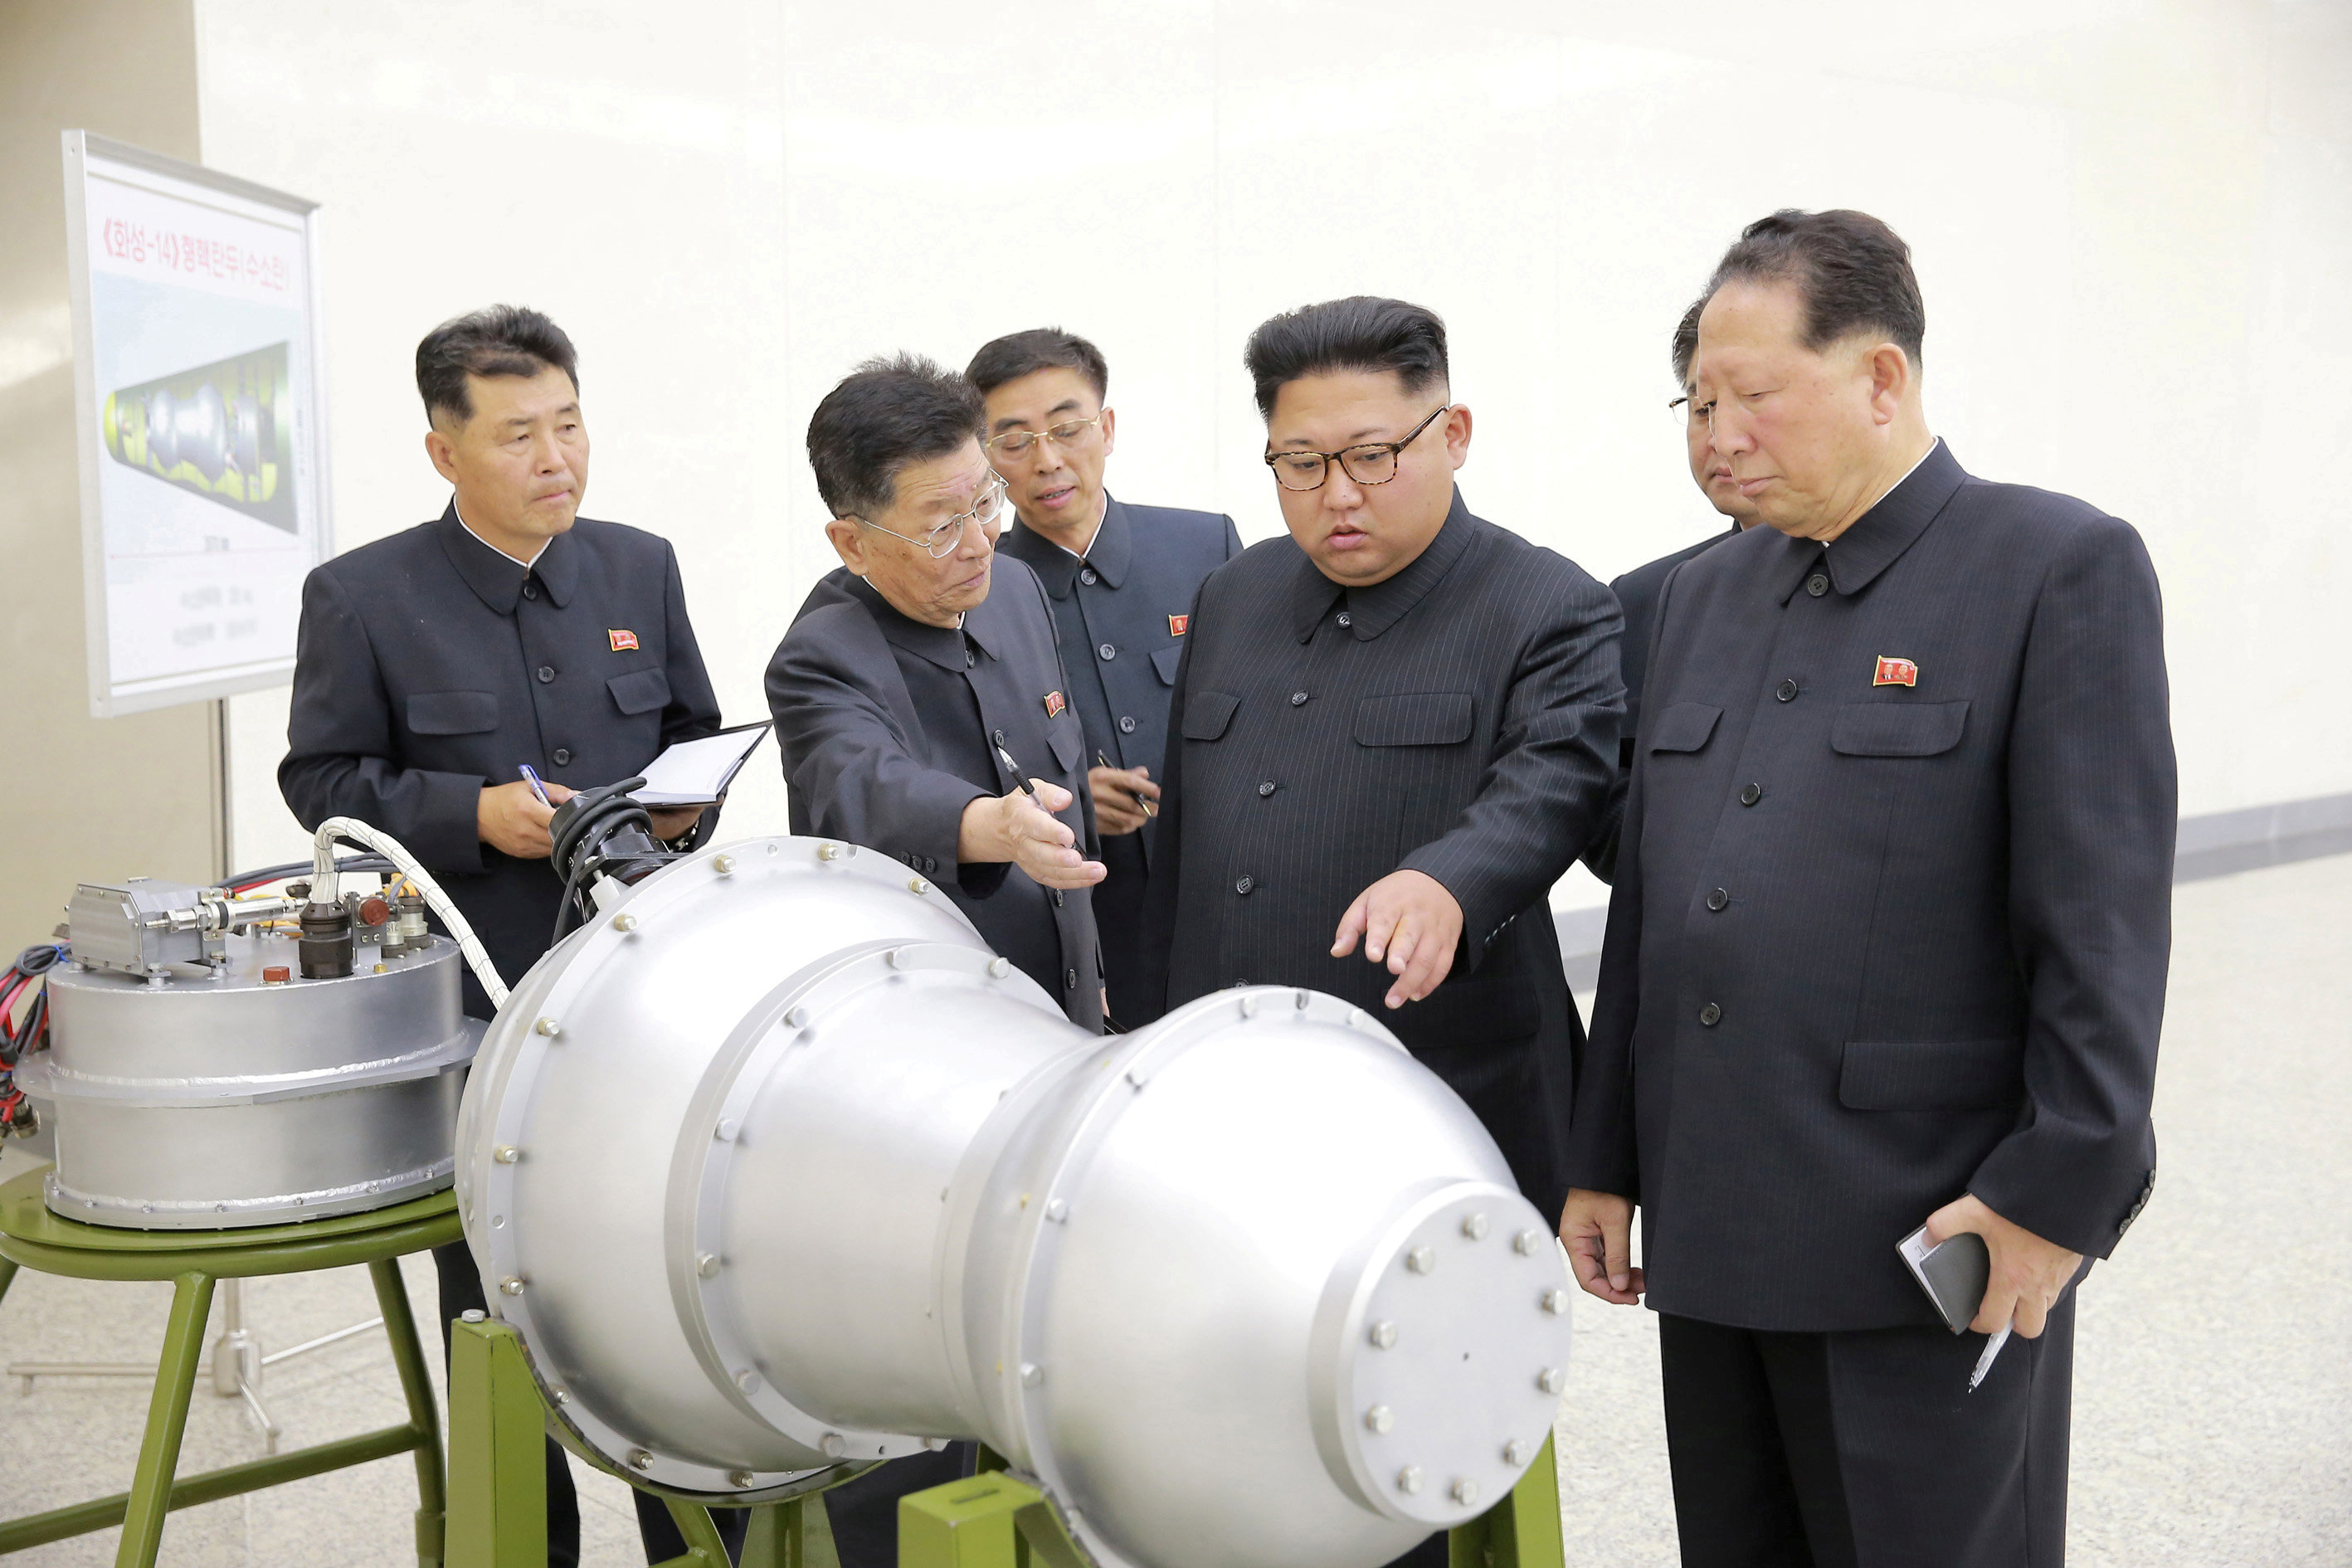 North Korean leader Kim Jong Un provides guidance on a nuclear weapons program in September 2017.